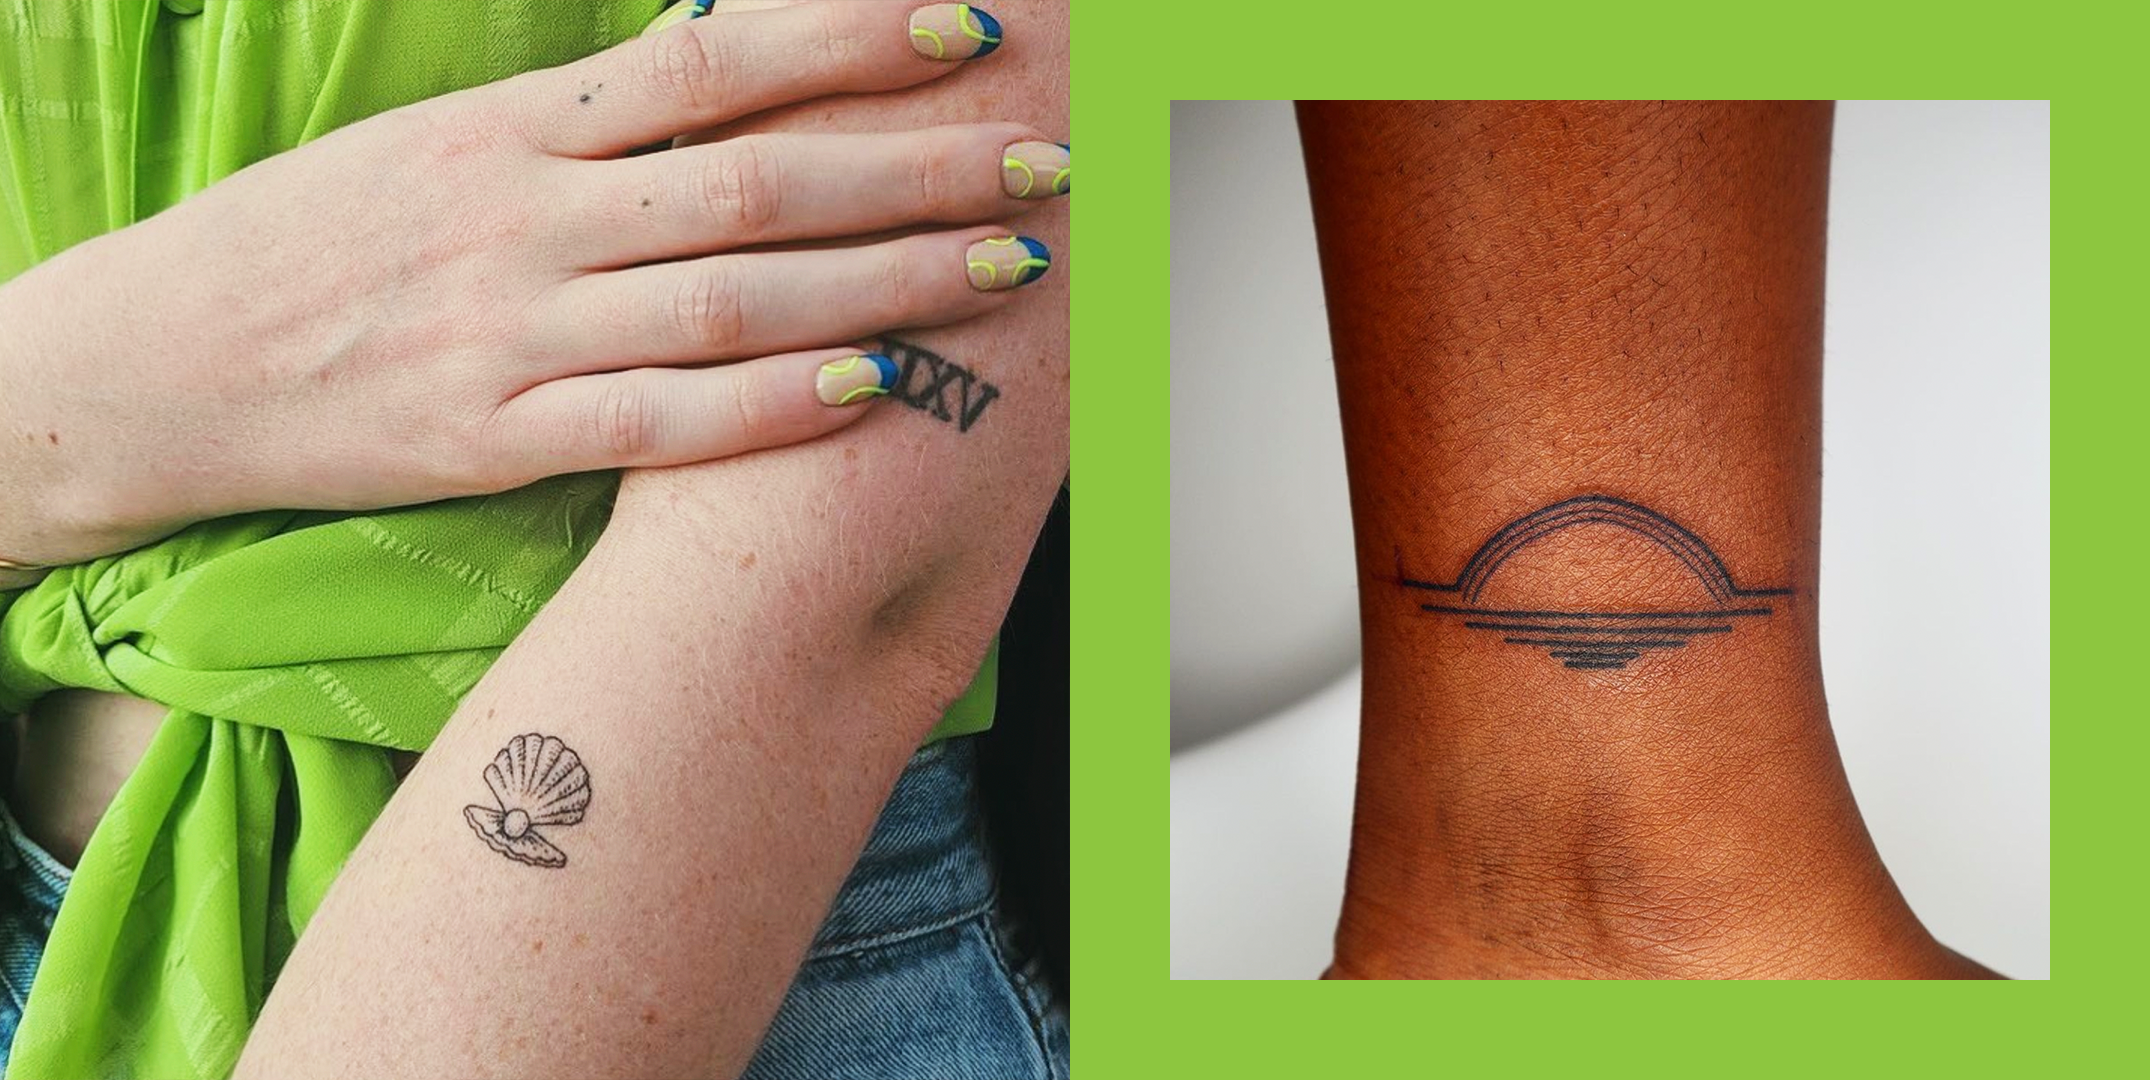 Tattoo Stretching Why It Happens and Tips to Prevent It